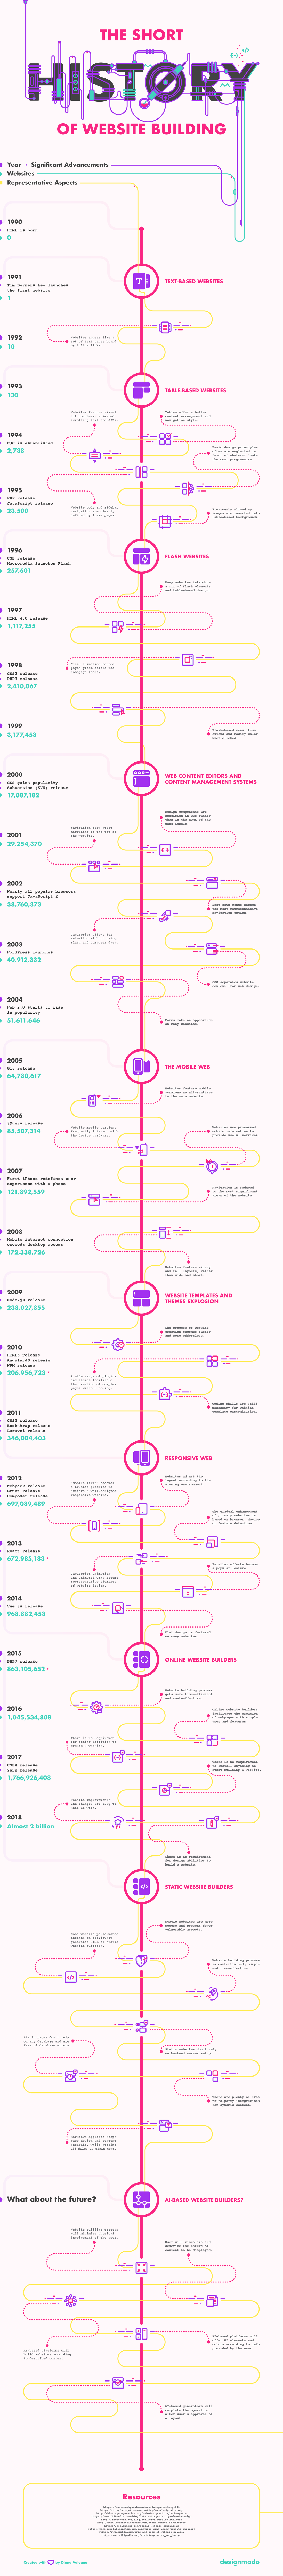 The Short History of Website Building [Infographic]